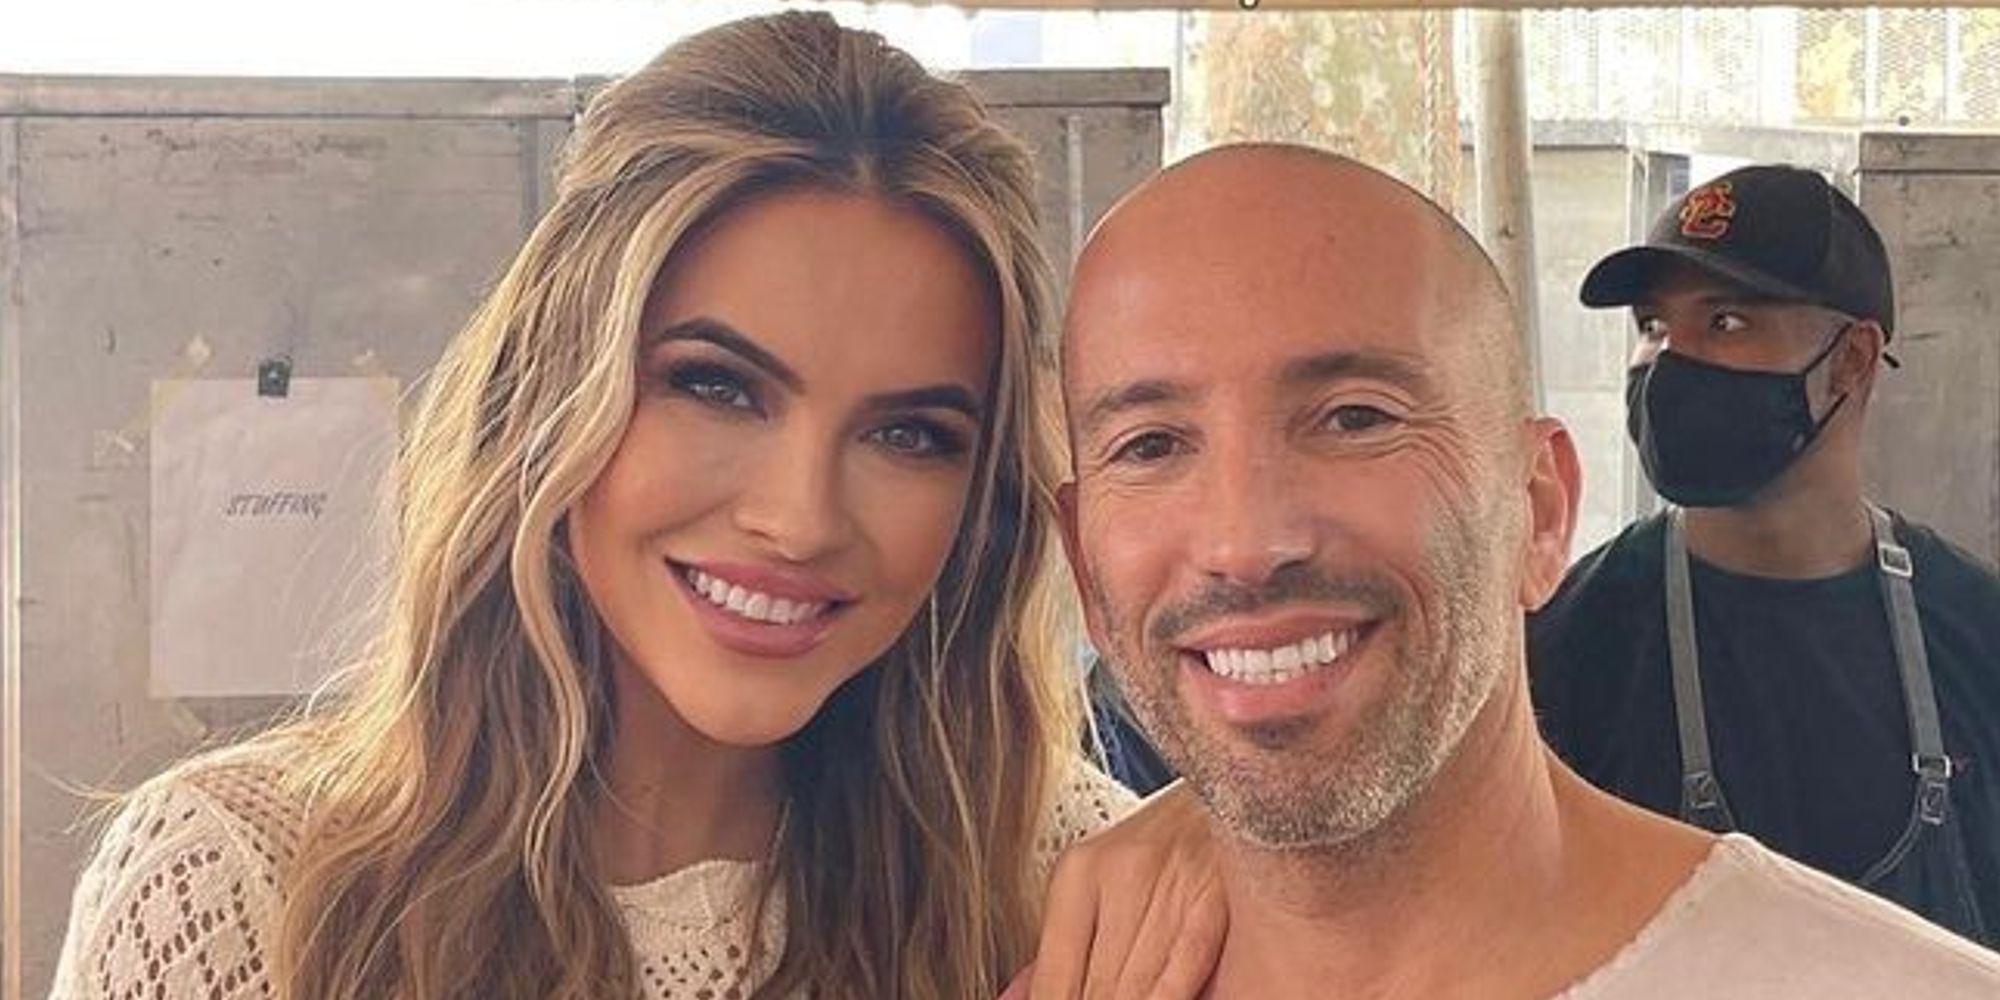 Chrishell Stause and Jason Oppenheim from Selling Sunset share picture together on Instagram